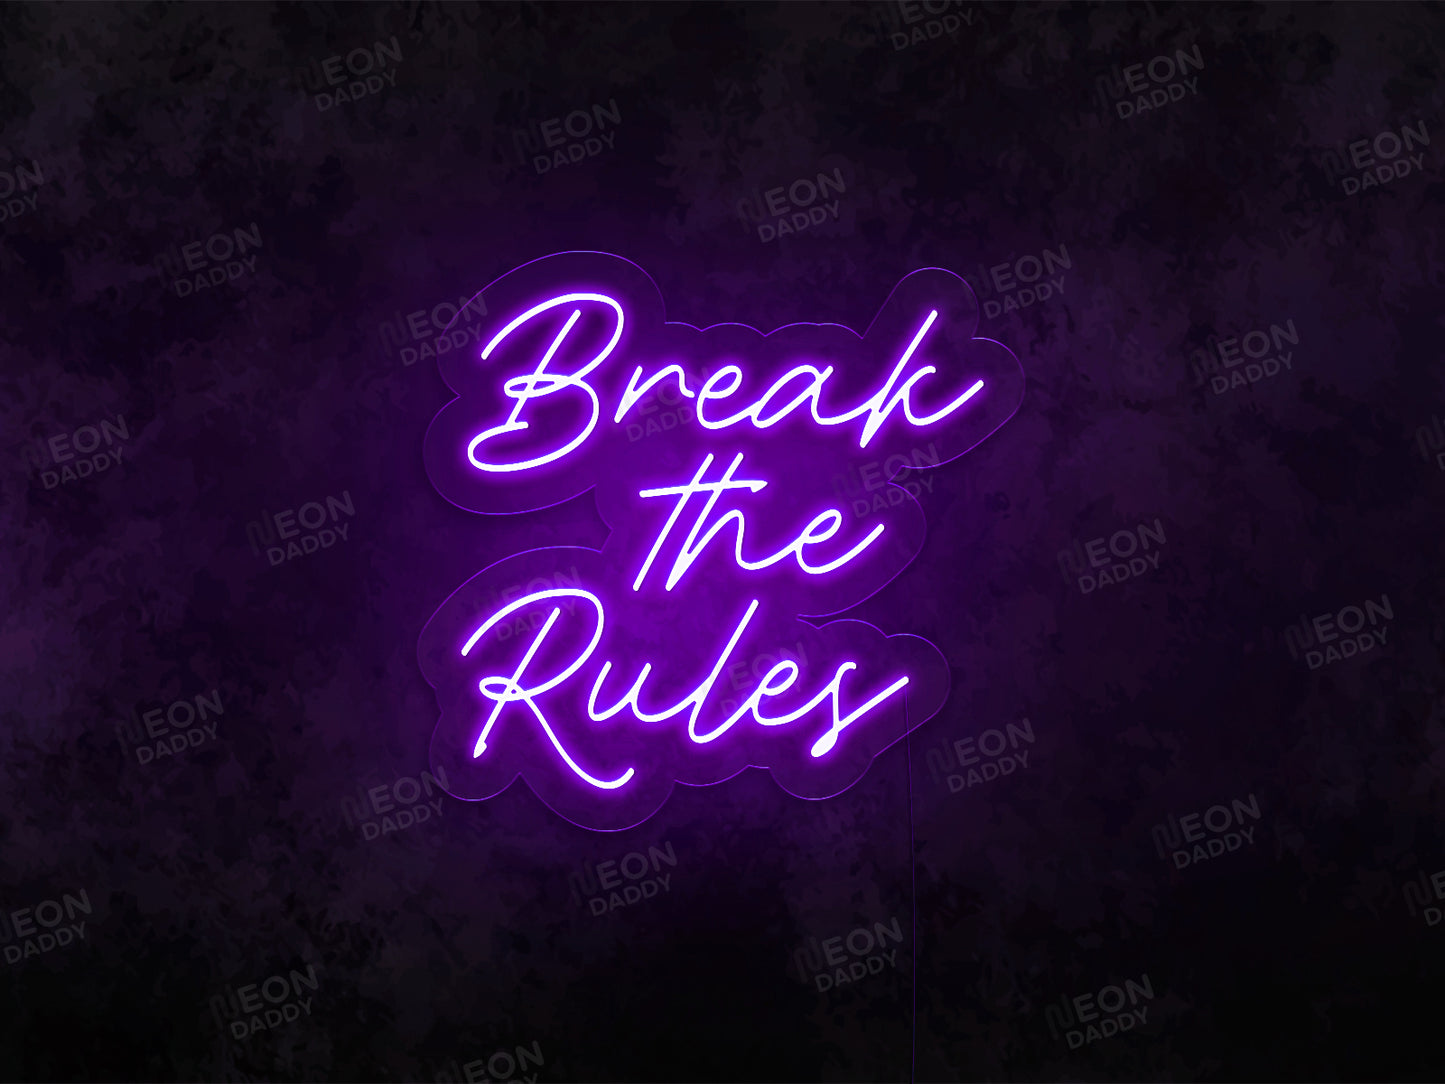 Break the Rules Neon Sign